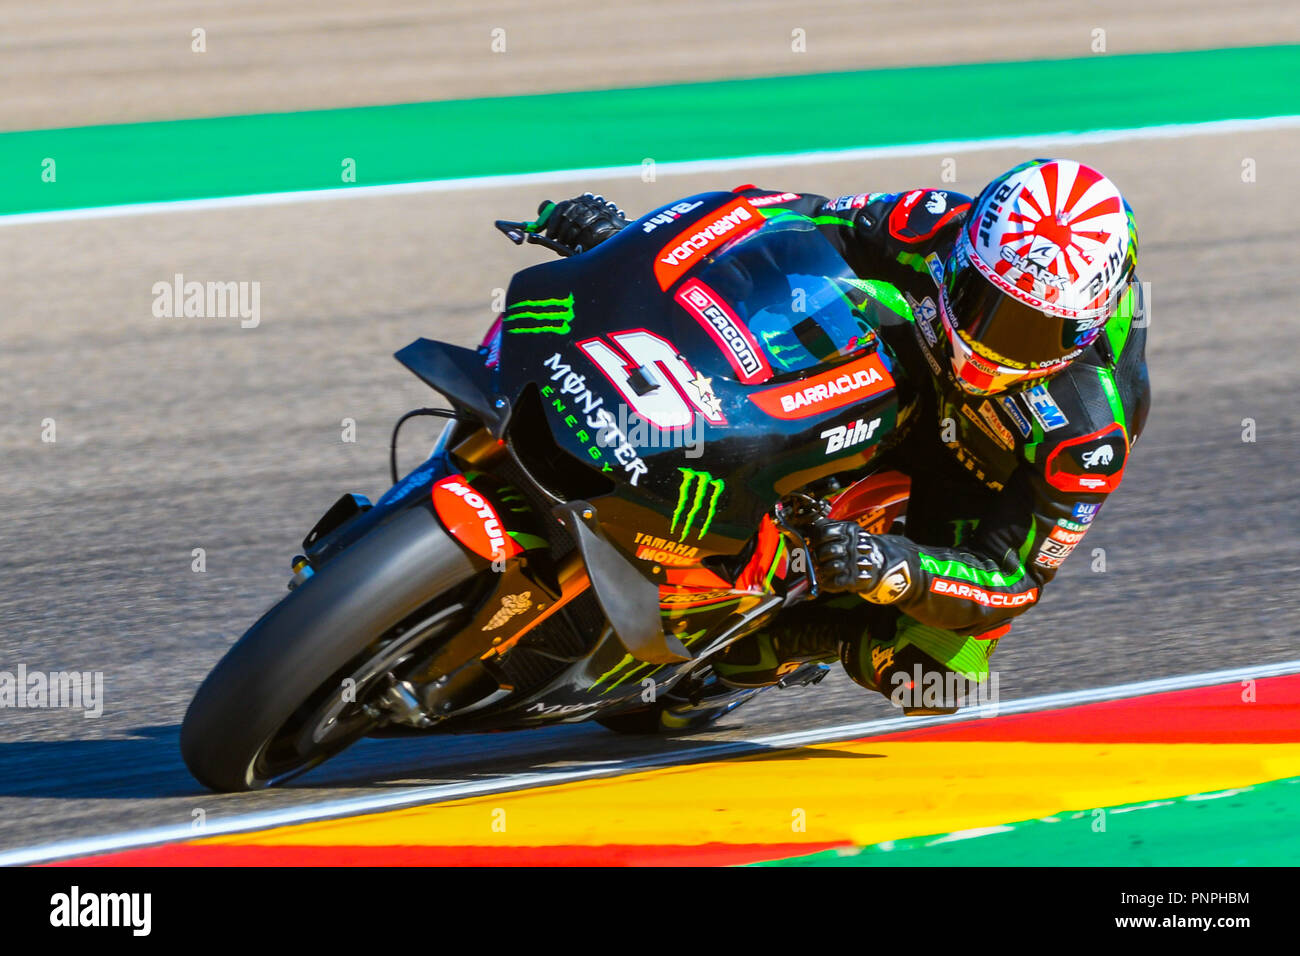 JOHANN ZARCO (5) of France and Monster Yamaha Tech 3 during the MOTO GP  Free Practice